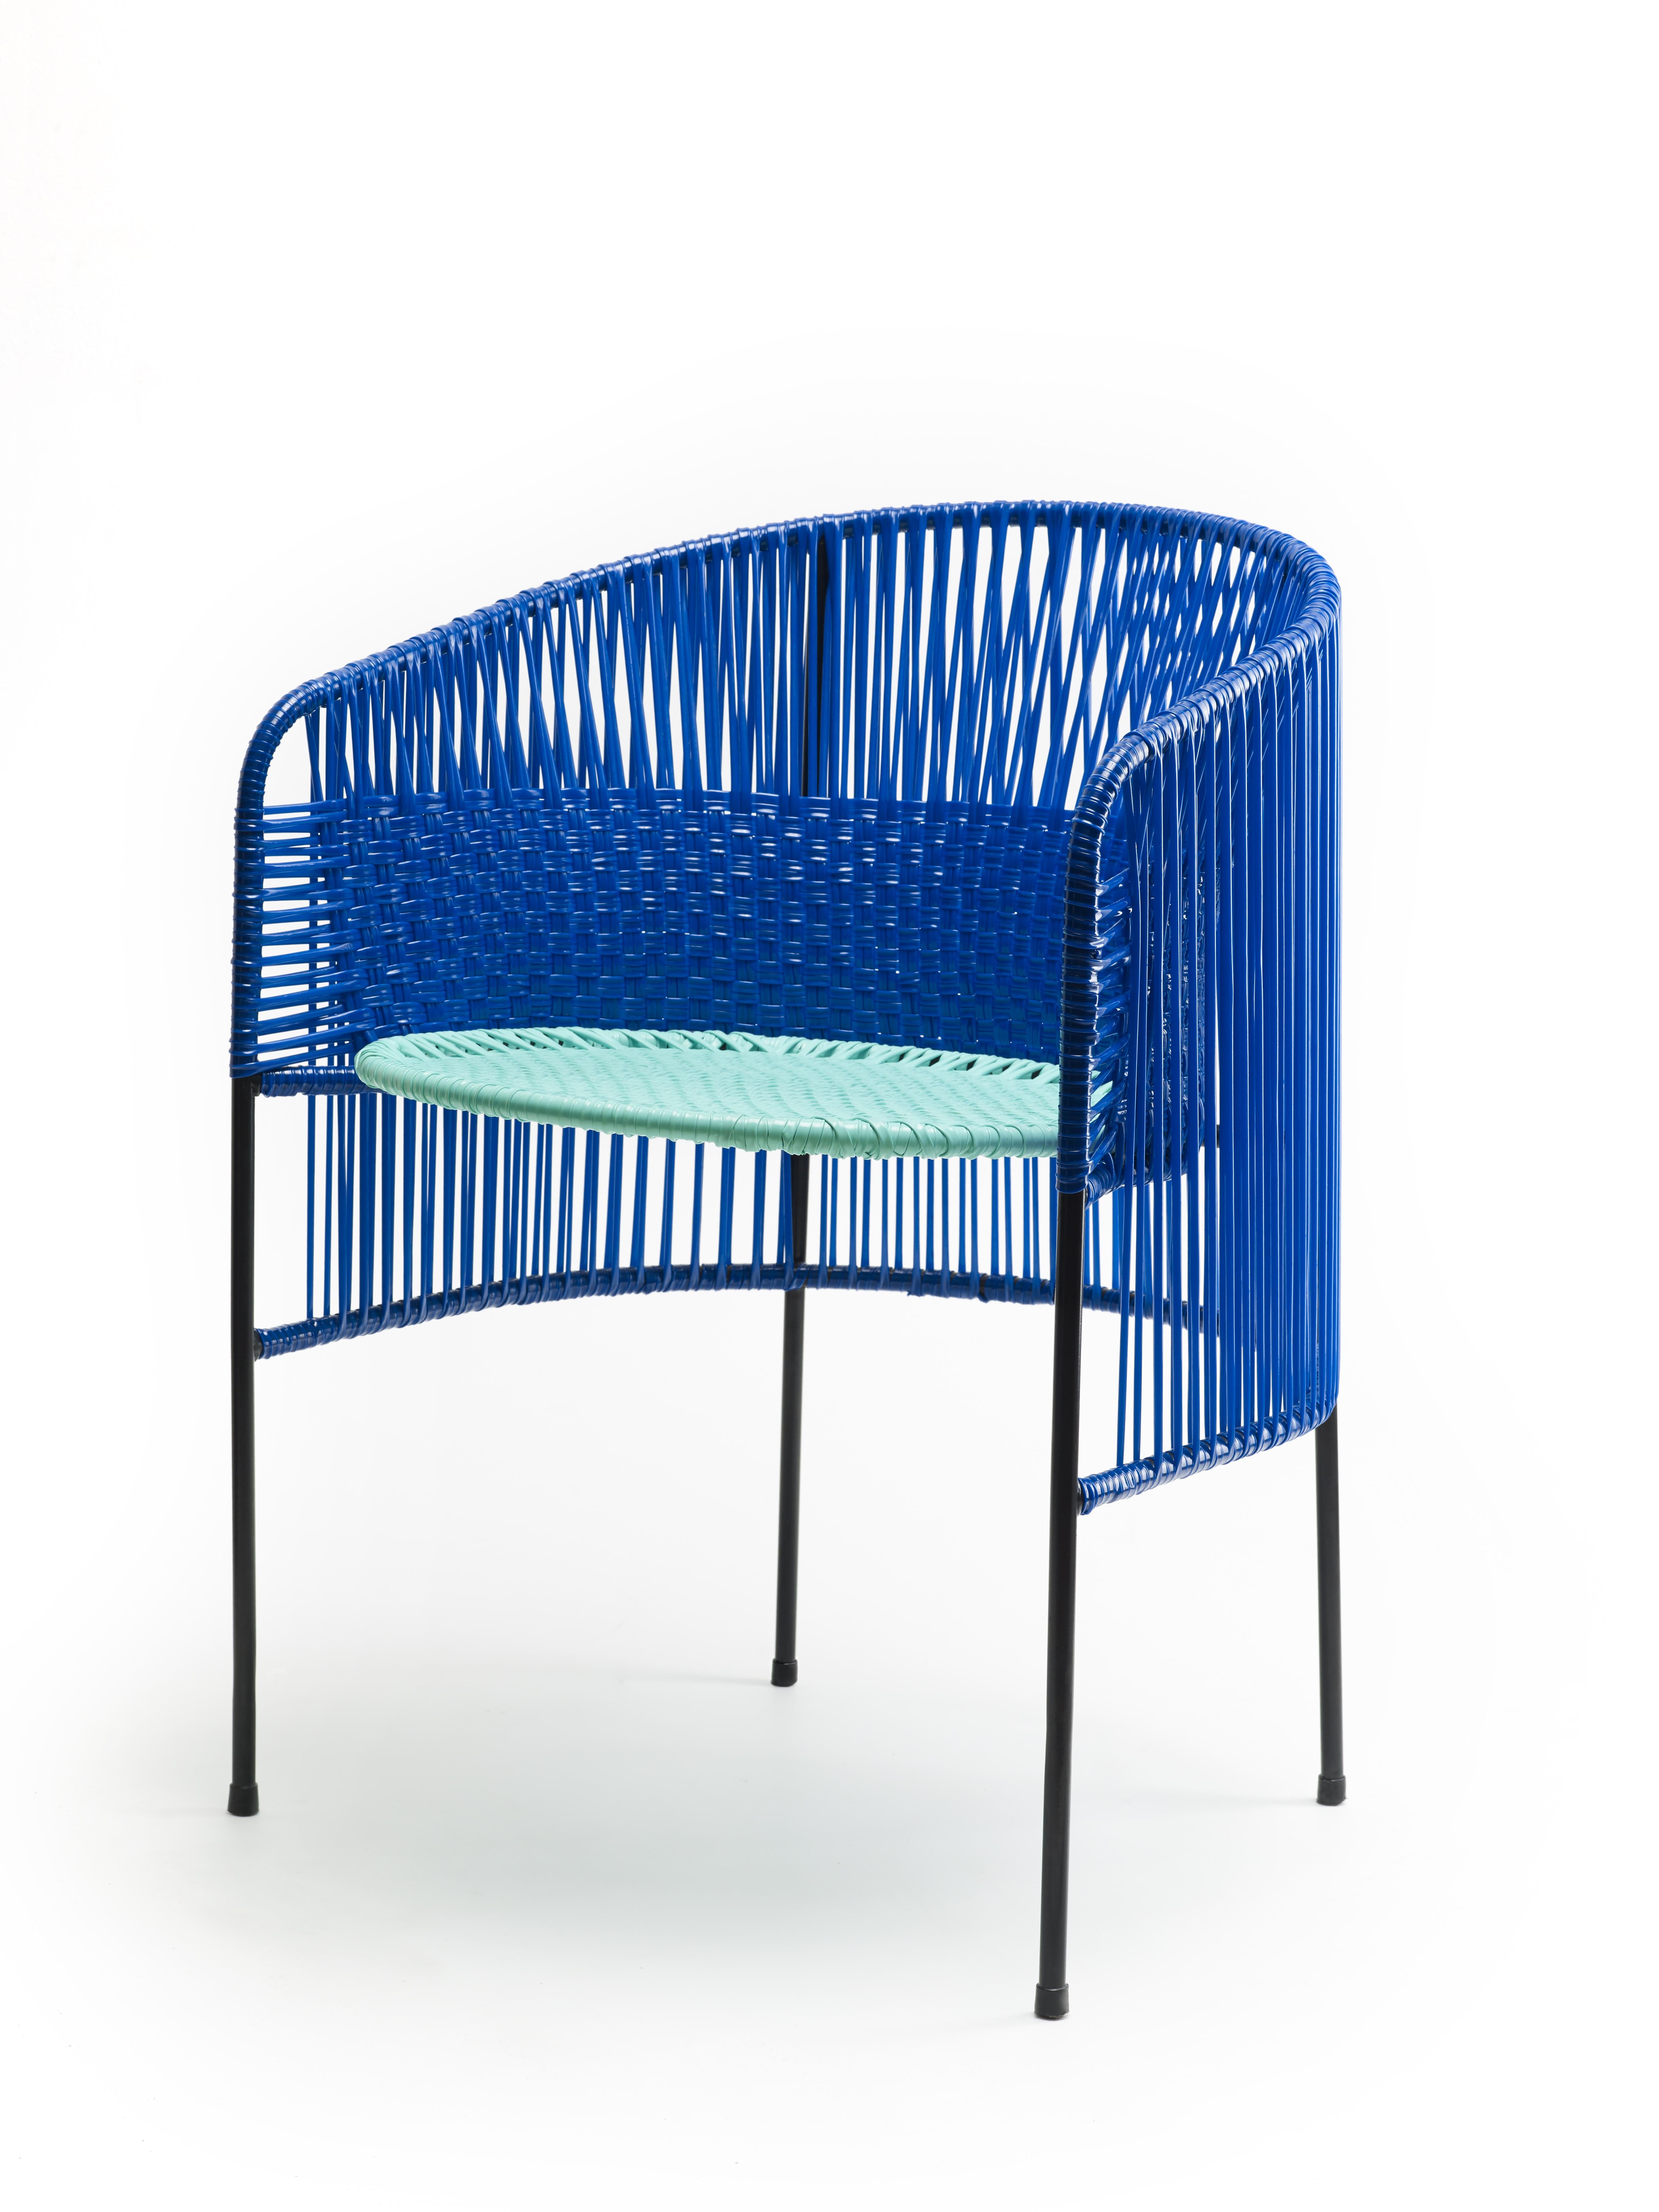 Blue Caribe lounge chair by Sebastian Herkner
Materials: Galvanized and powder-coated tubular steel. PVC strings are made from recycled plastic.
Technique: Made from recycled plastic and weaved by local craftspeople in Colombia. 
Dimensions: W